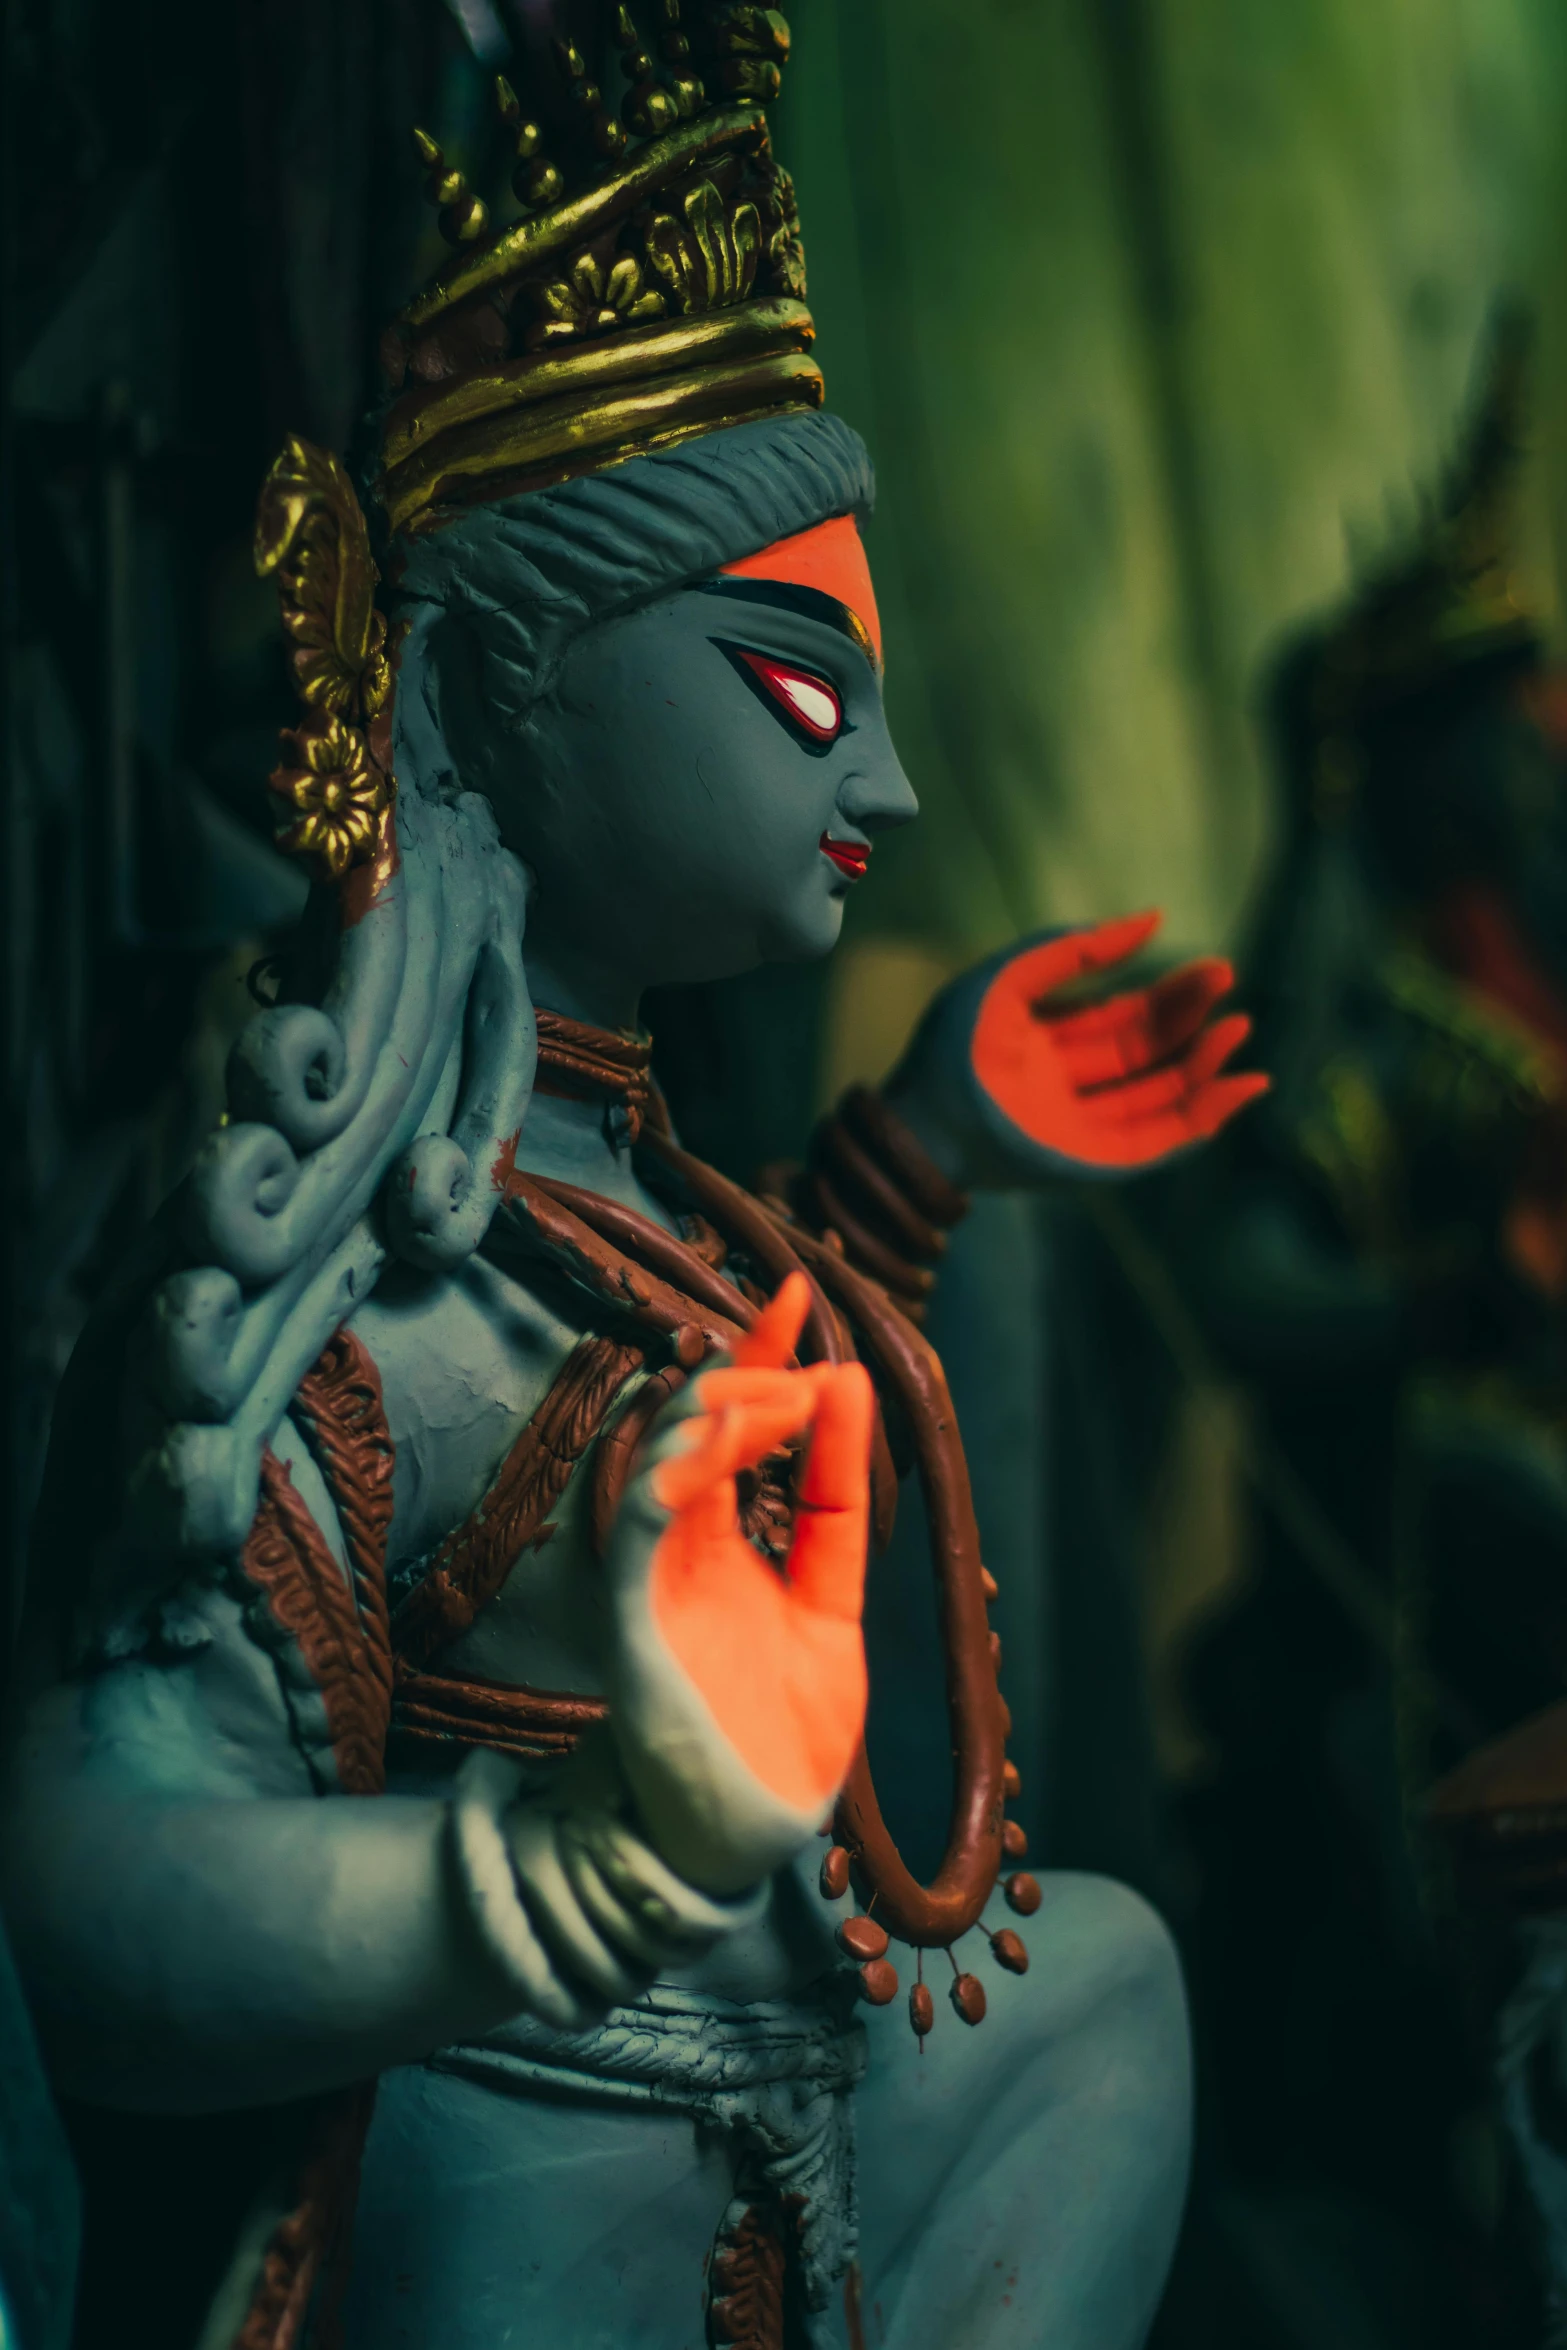 a close up of a statue of a person, anjali mudra, blue colors with red accents, claymation, highly cinematic